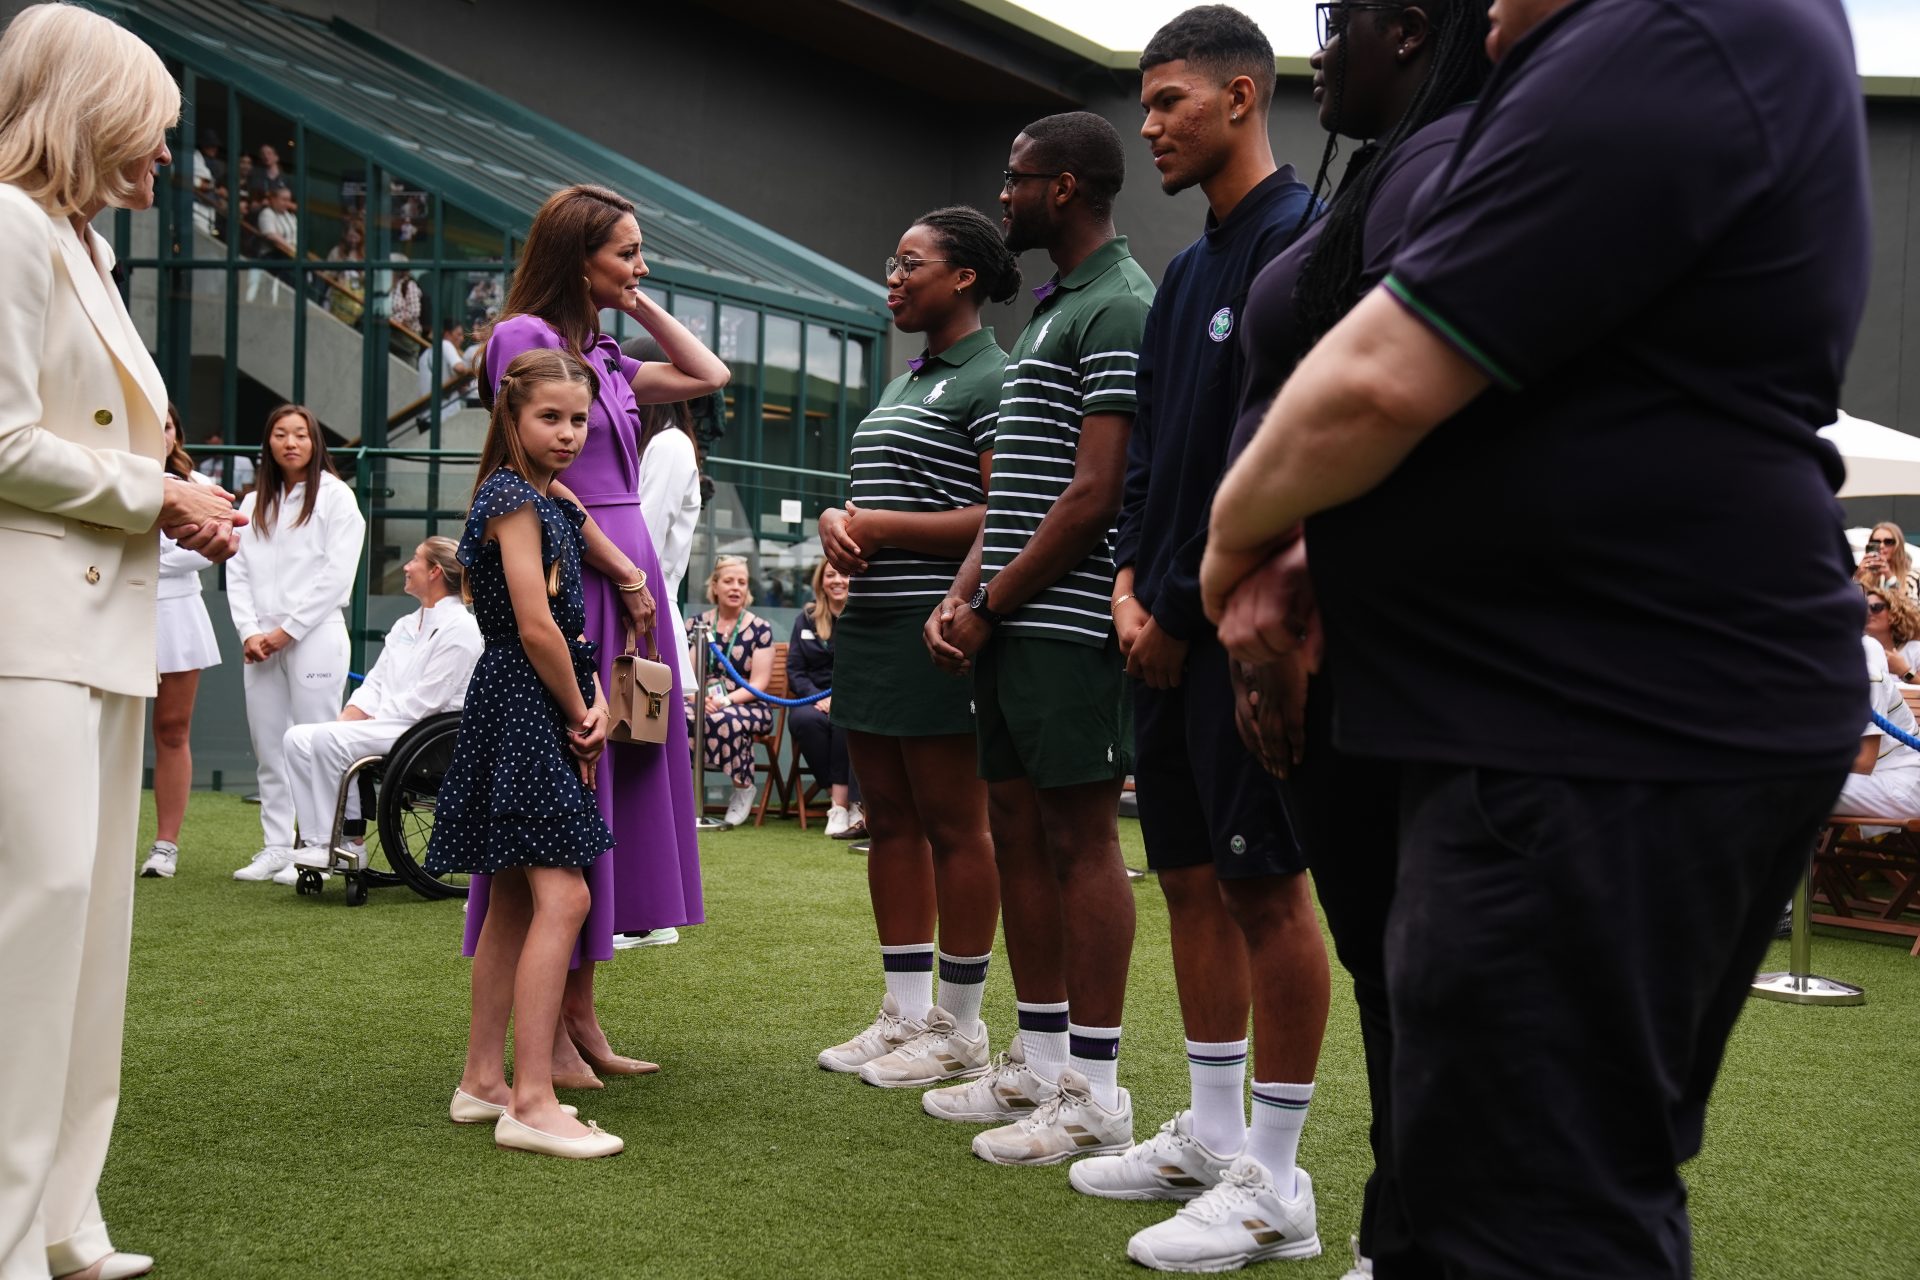 Kate Middleton is Patron of the All England Lawn Tennis & Croquet Club (AELTC)